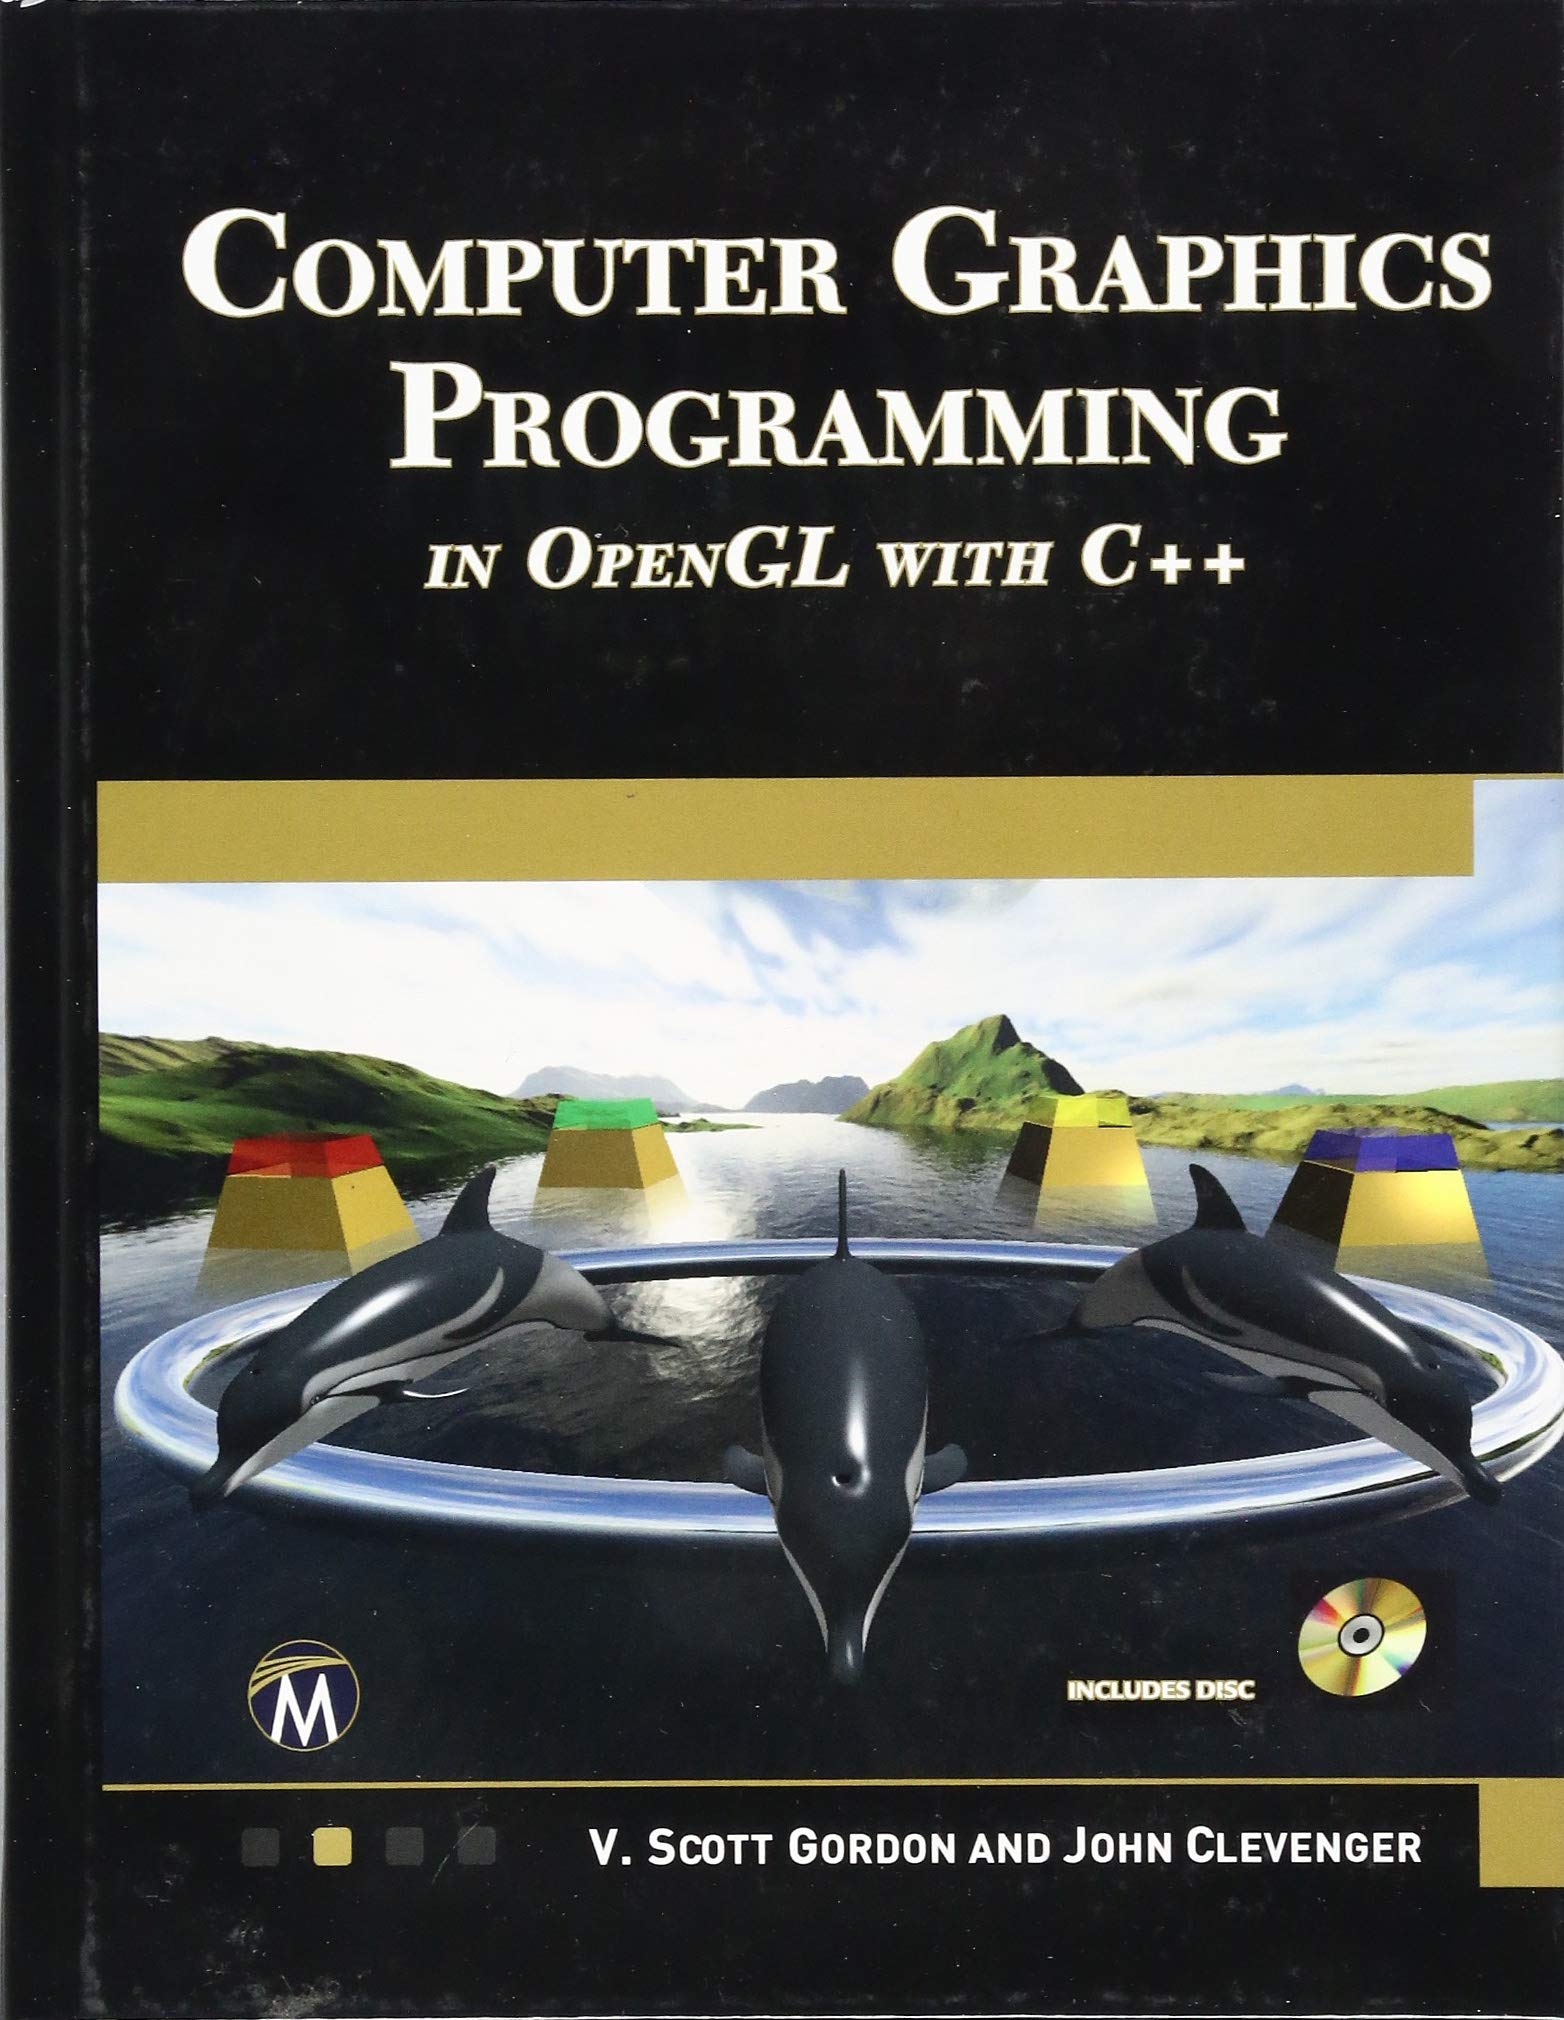 cheapest opengl 3.3 graphics card